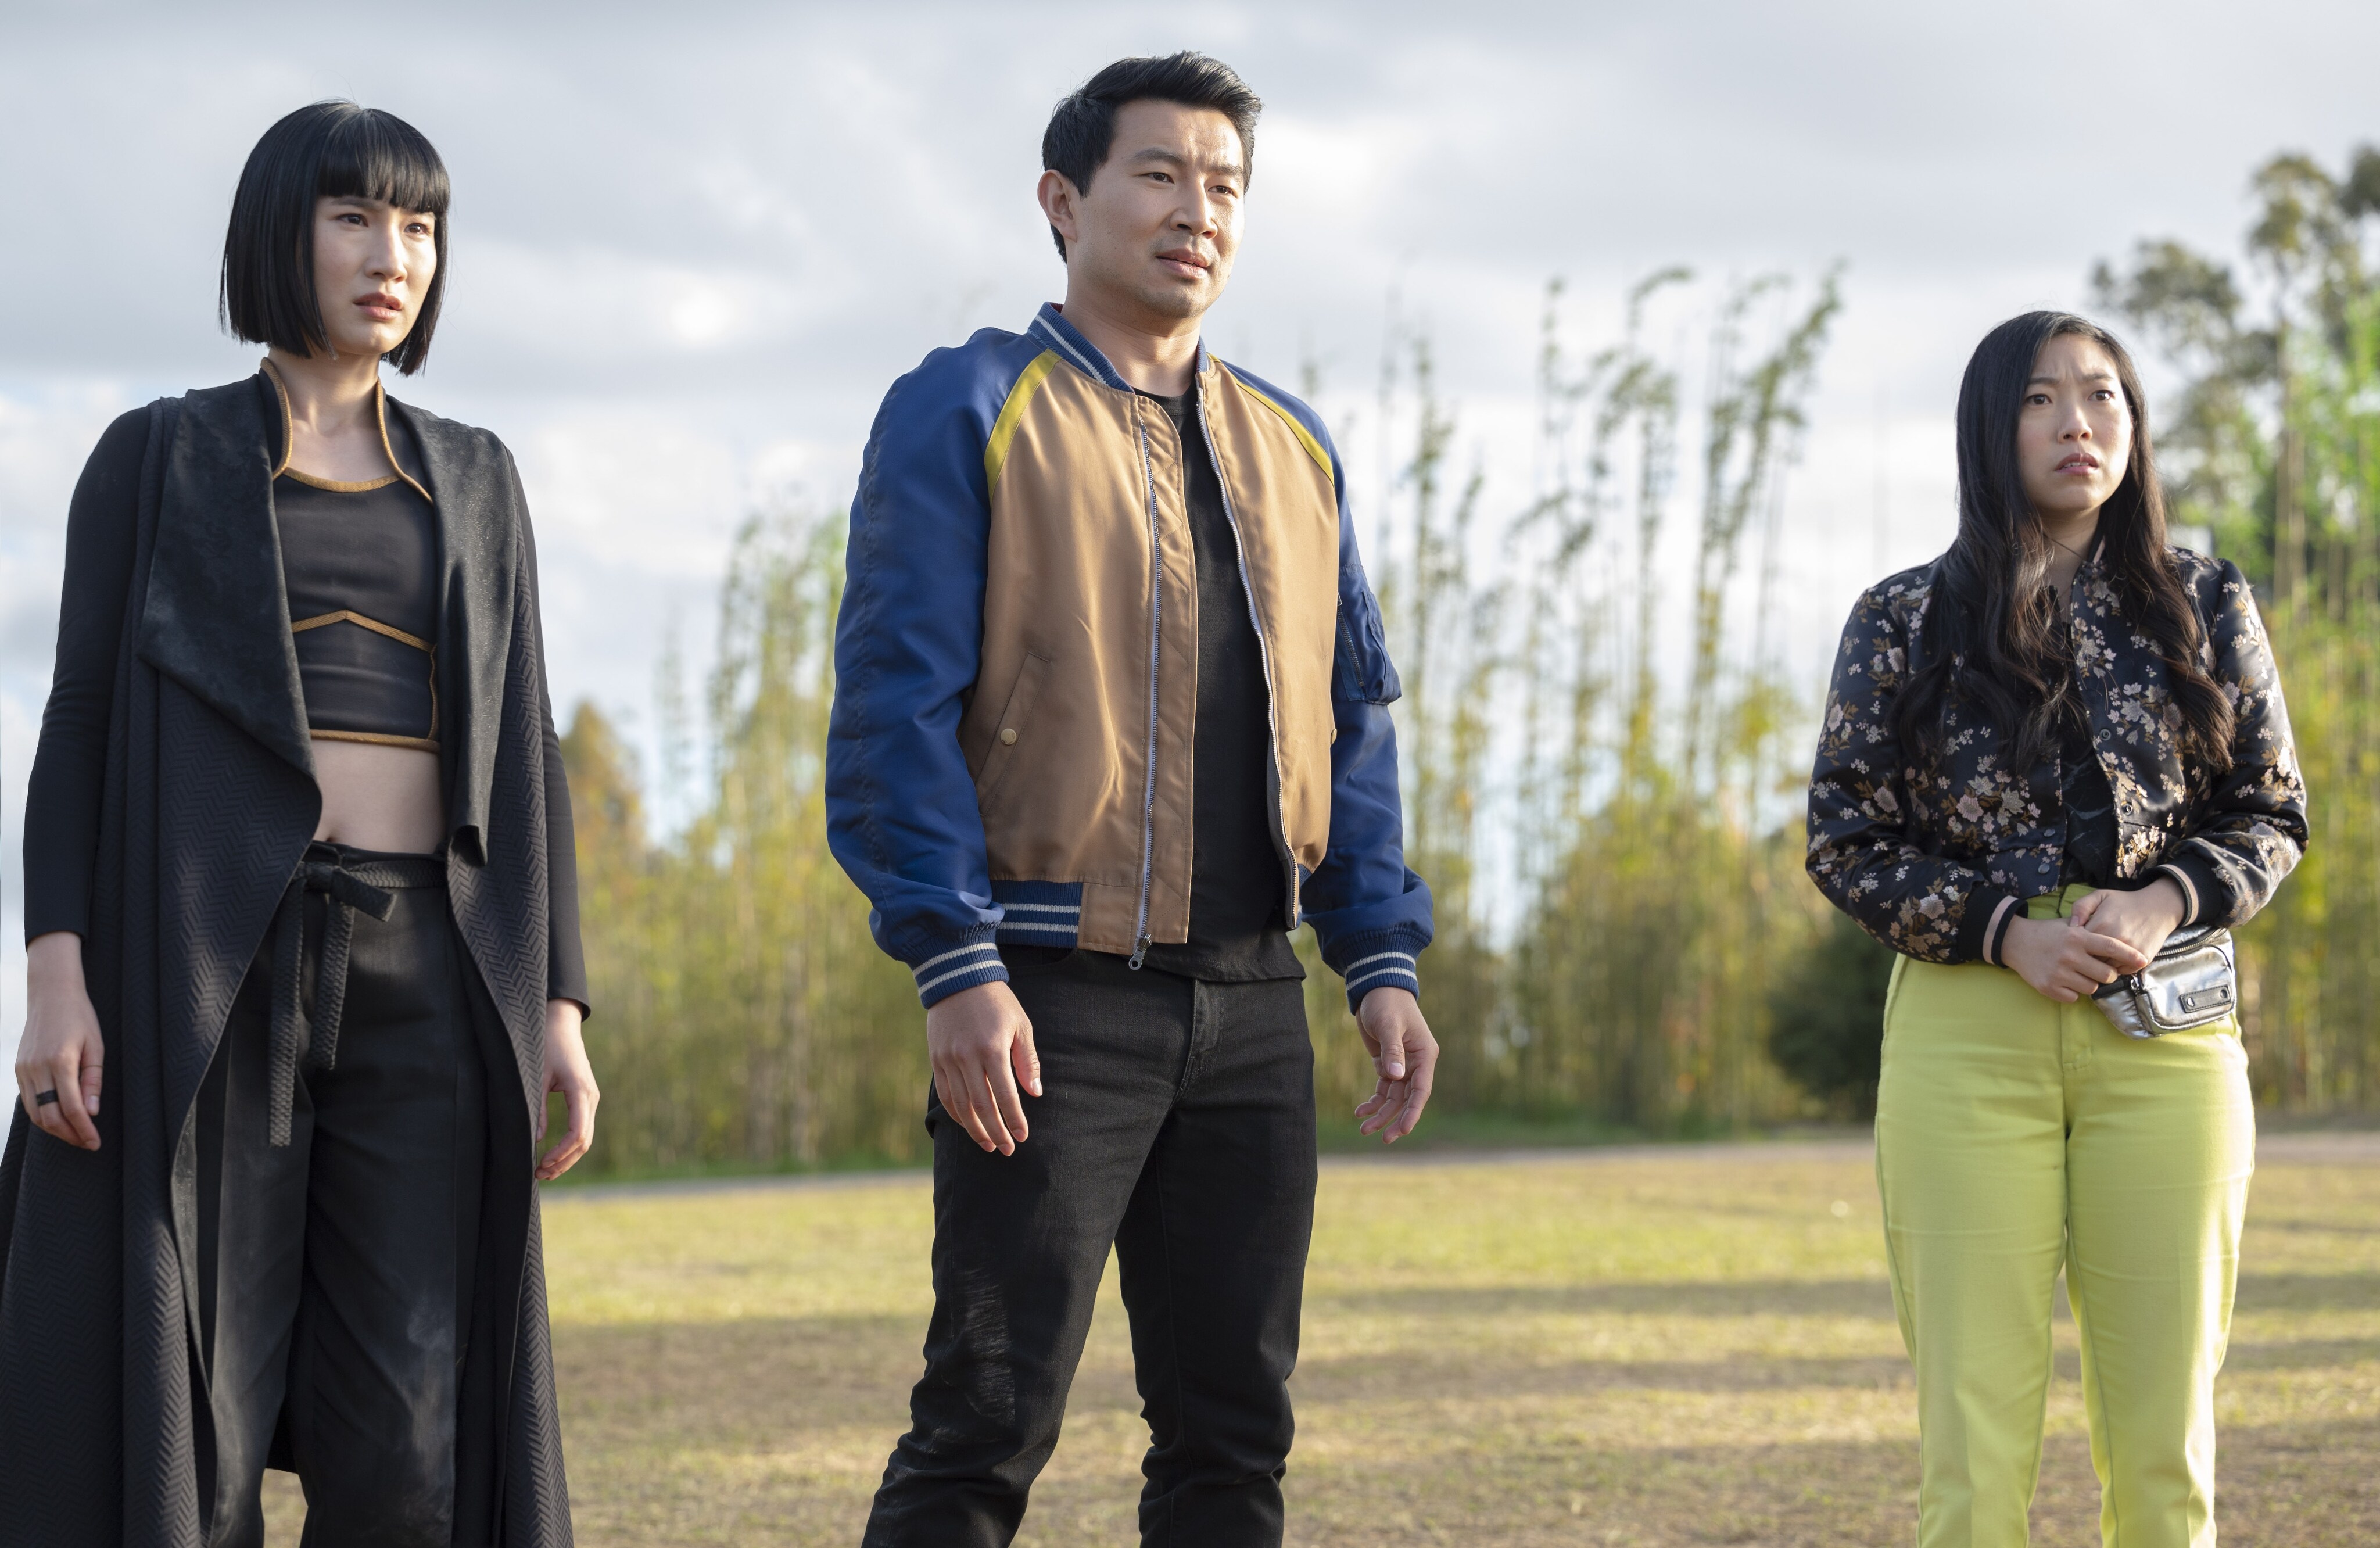 Meng'er Zhang as Xialing, Simu Liu as Shang-Chi, and Awkwafina as Katy in Marvel Studios' Shang-Chi and the Legend of the Ten Rings